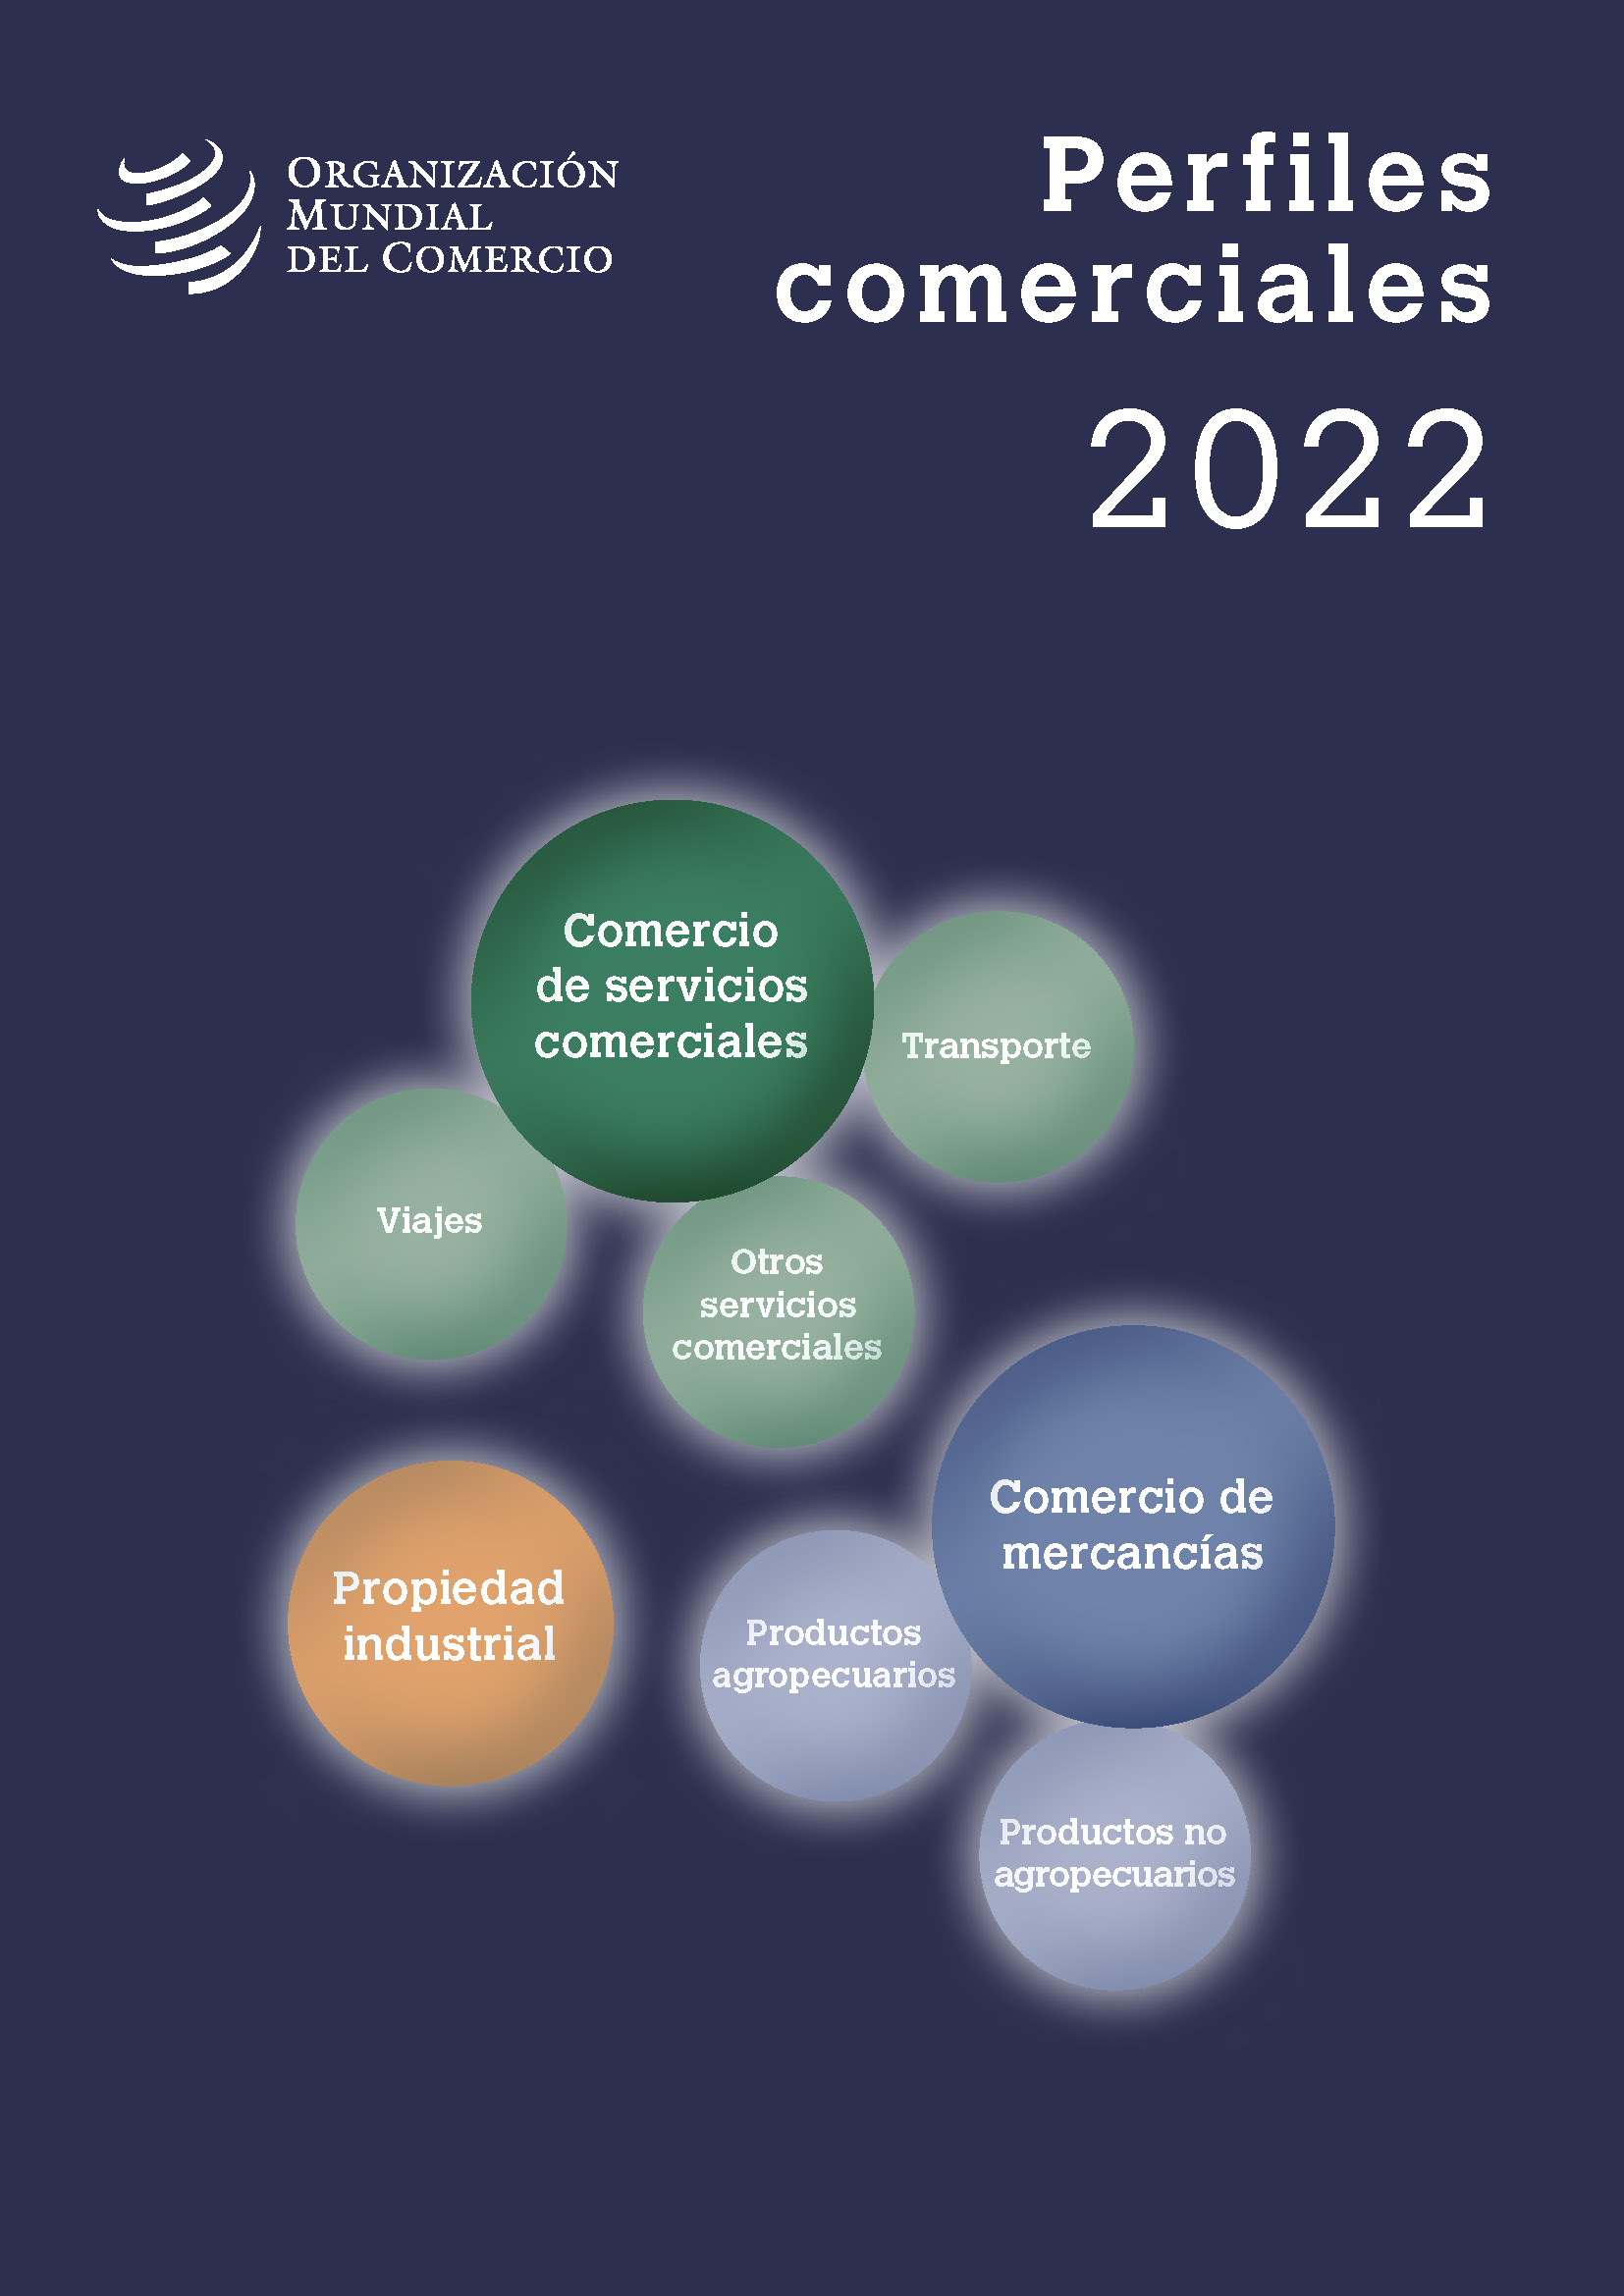 image of Perfiles comerciales 2022